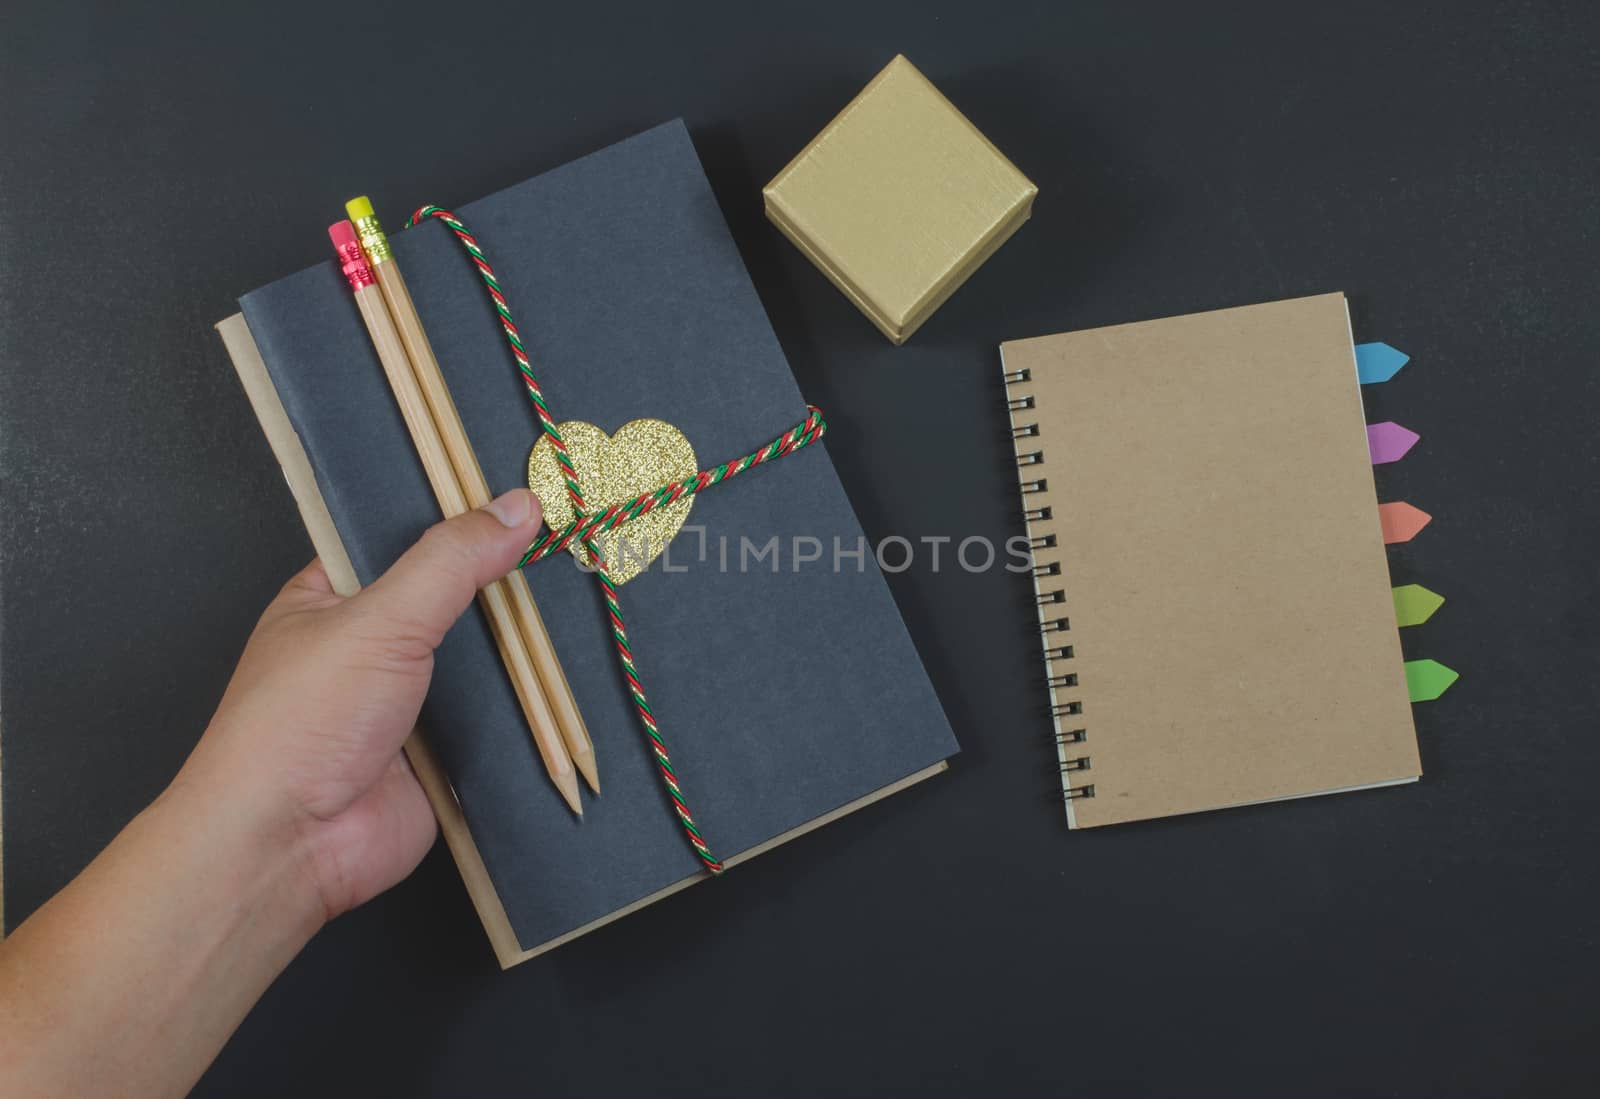  write paper notebook pencils on black background by metal22